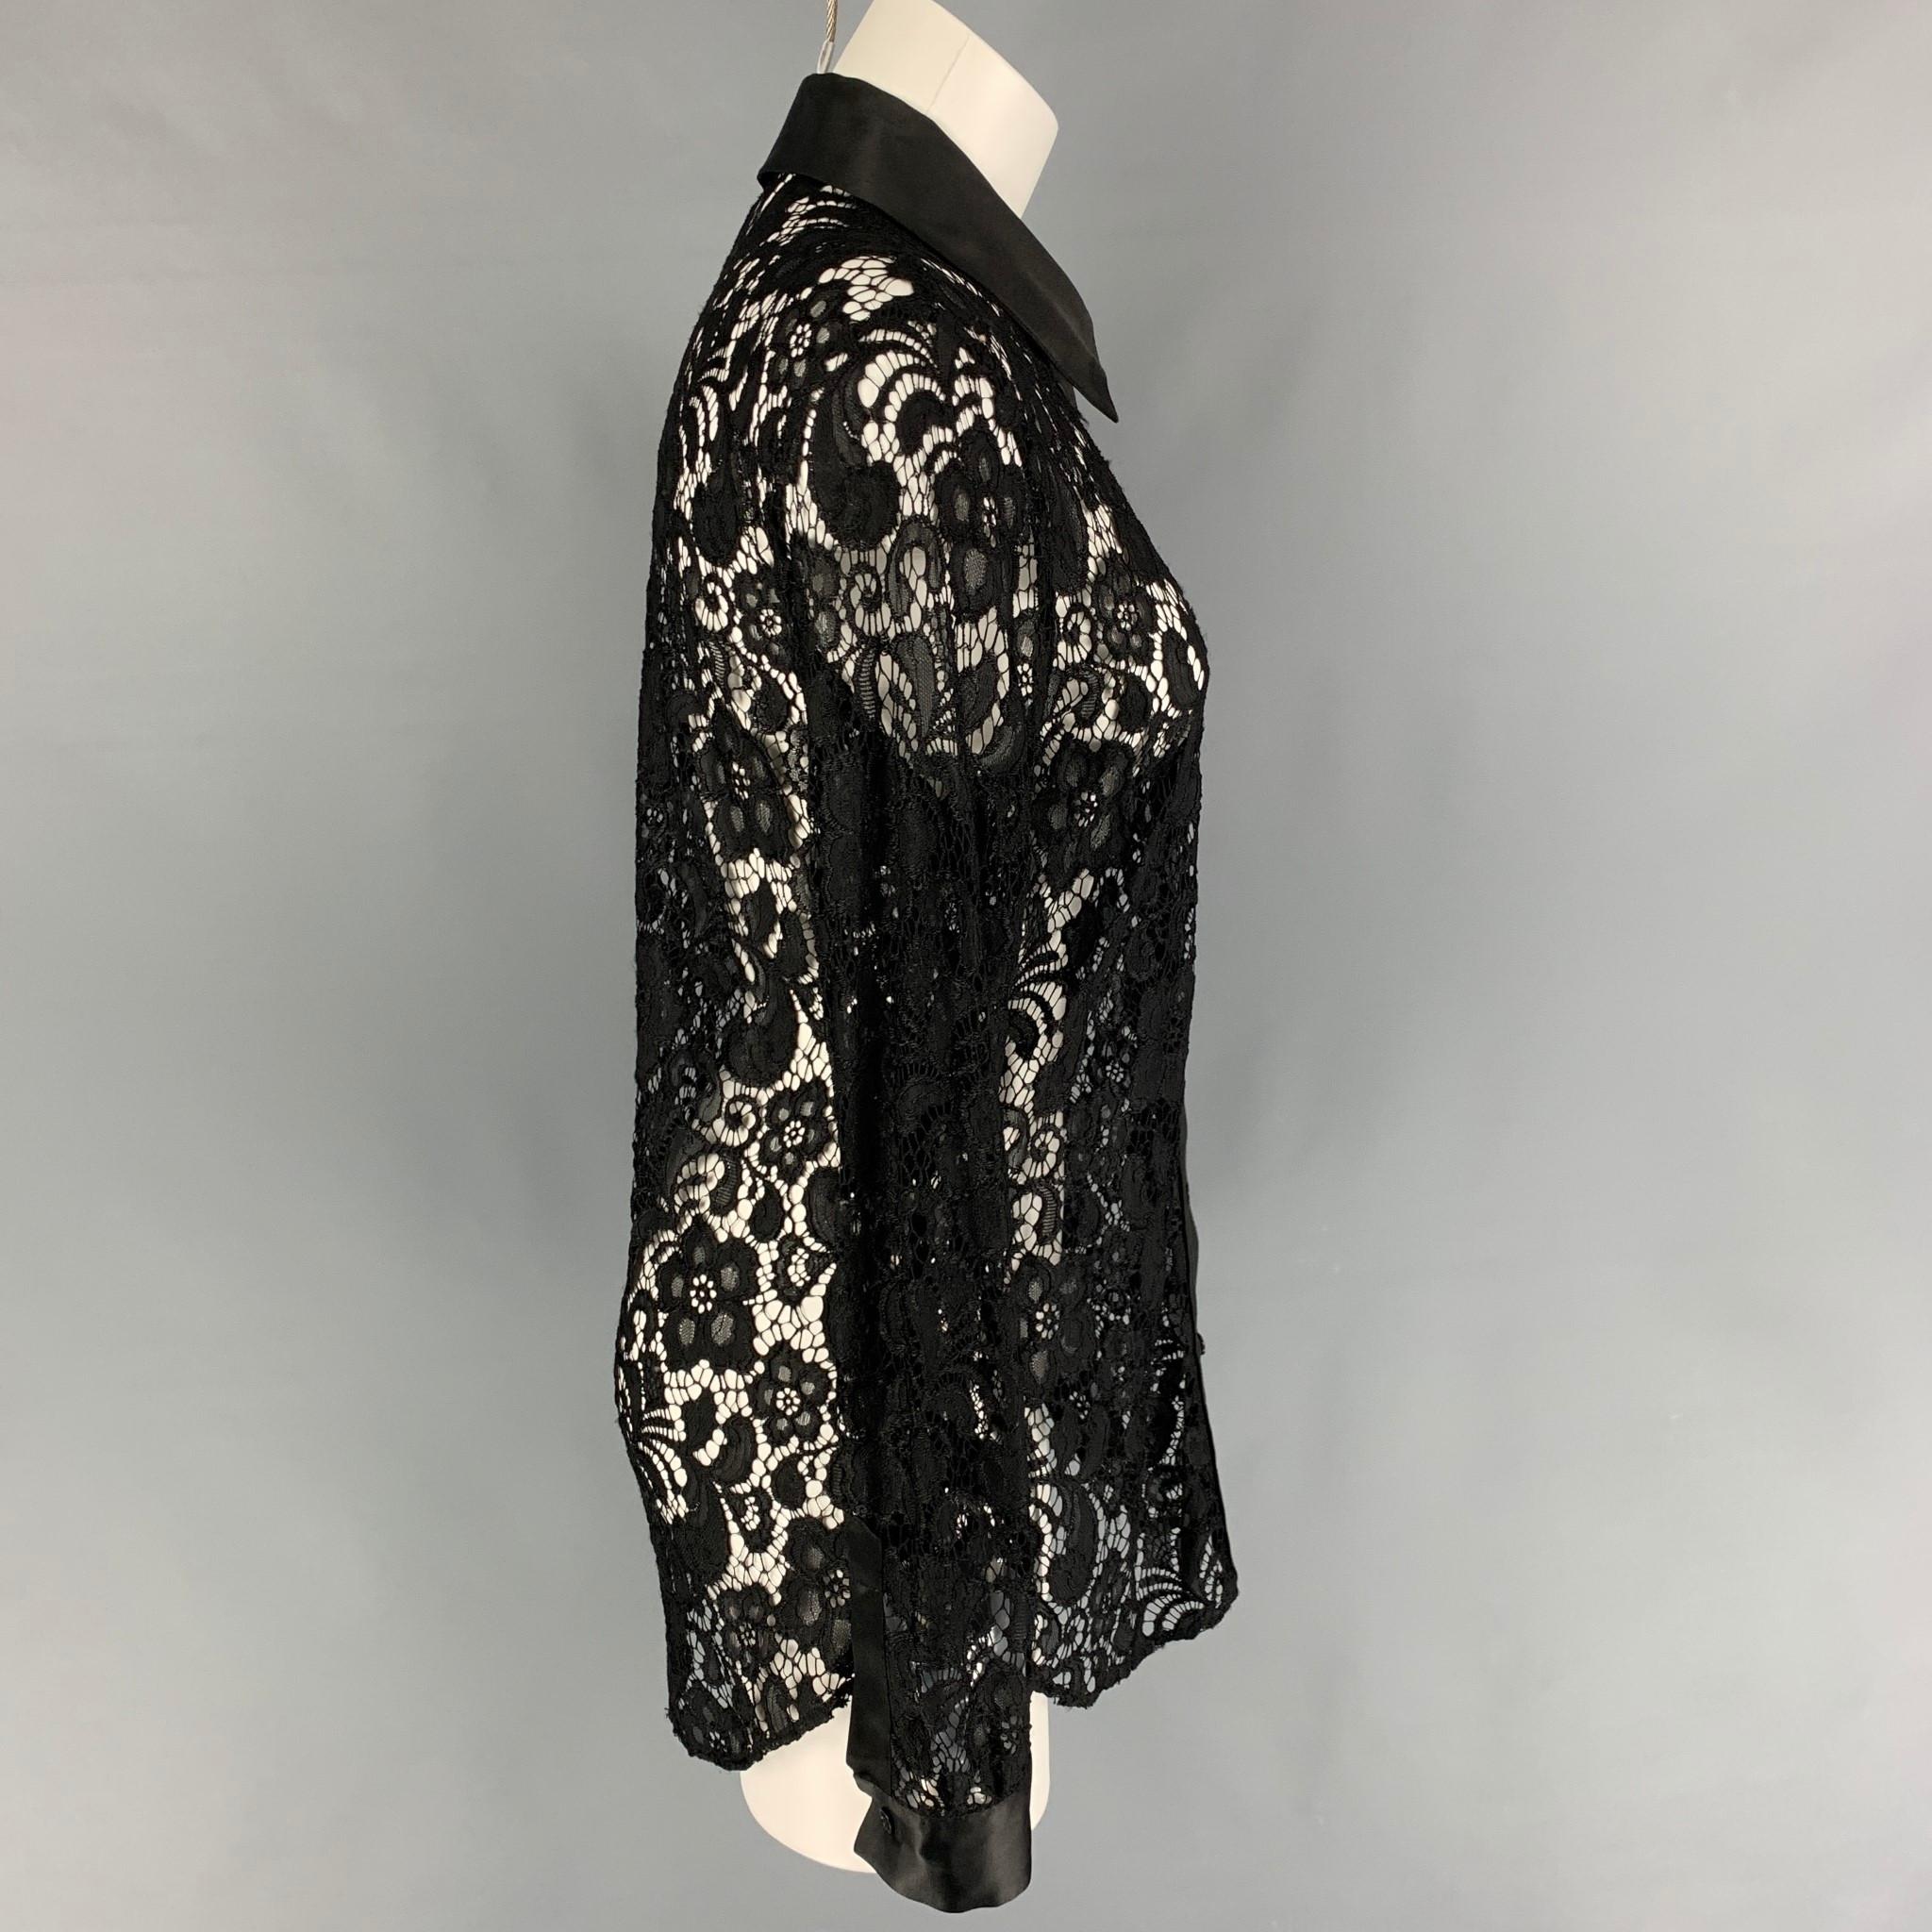 MOSCHINO shirt comes in a black lace polyamide featuring a spread collar and a button up closure. 

Very Good Pre-Owned Condition.
Marked: I 44 / D 40 / F 40 / GB 12 / USA 10

Measurements:

Shoulder: 16.5 in.
Bust: 36 in.
Sleeve: 27 in.
Length: